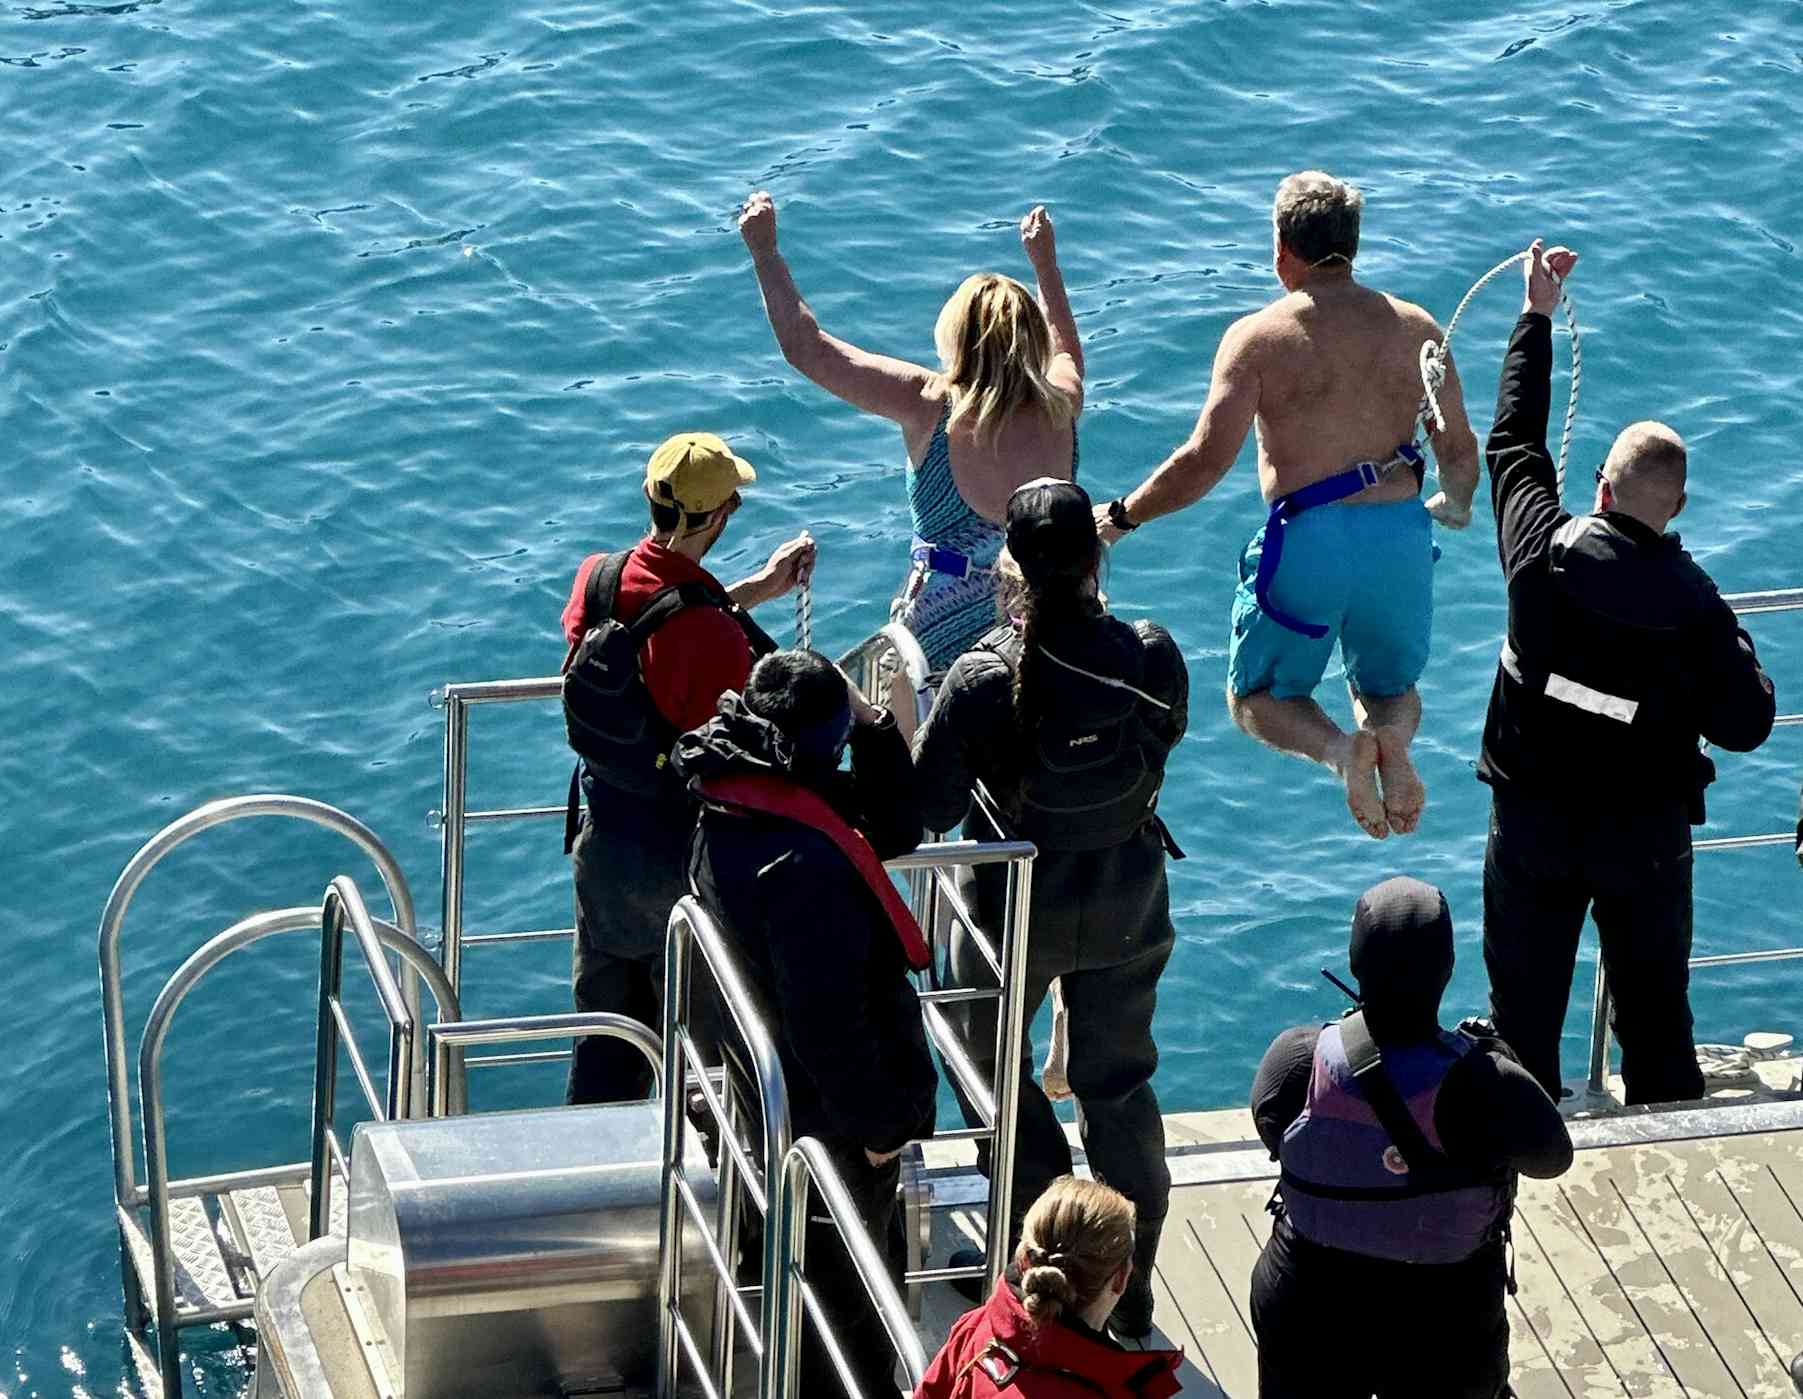 The Polar Plunge: Everything You Need to Know